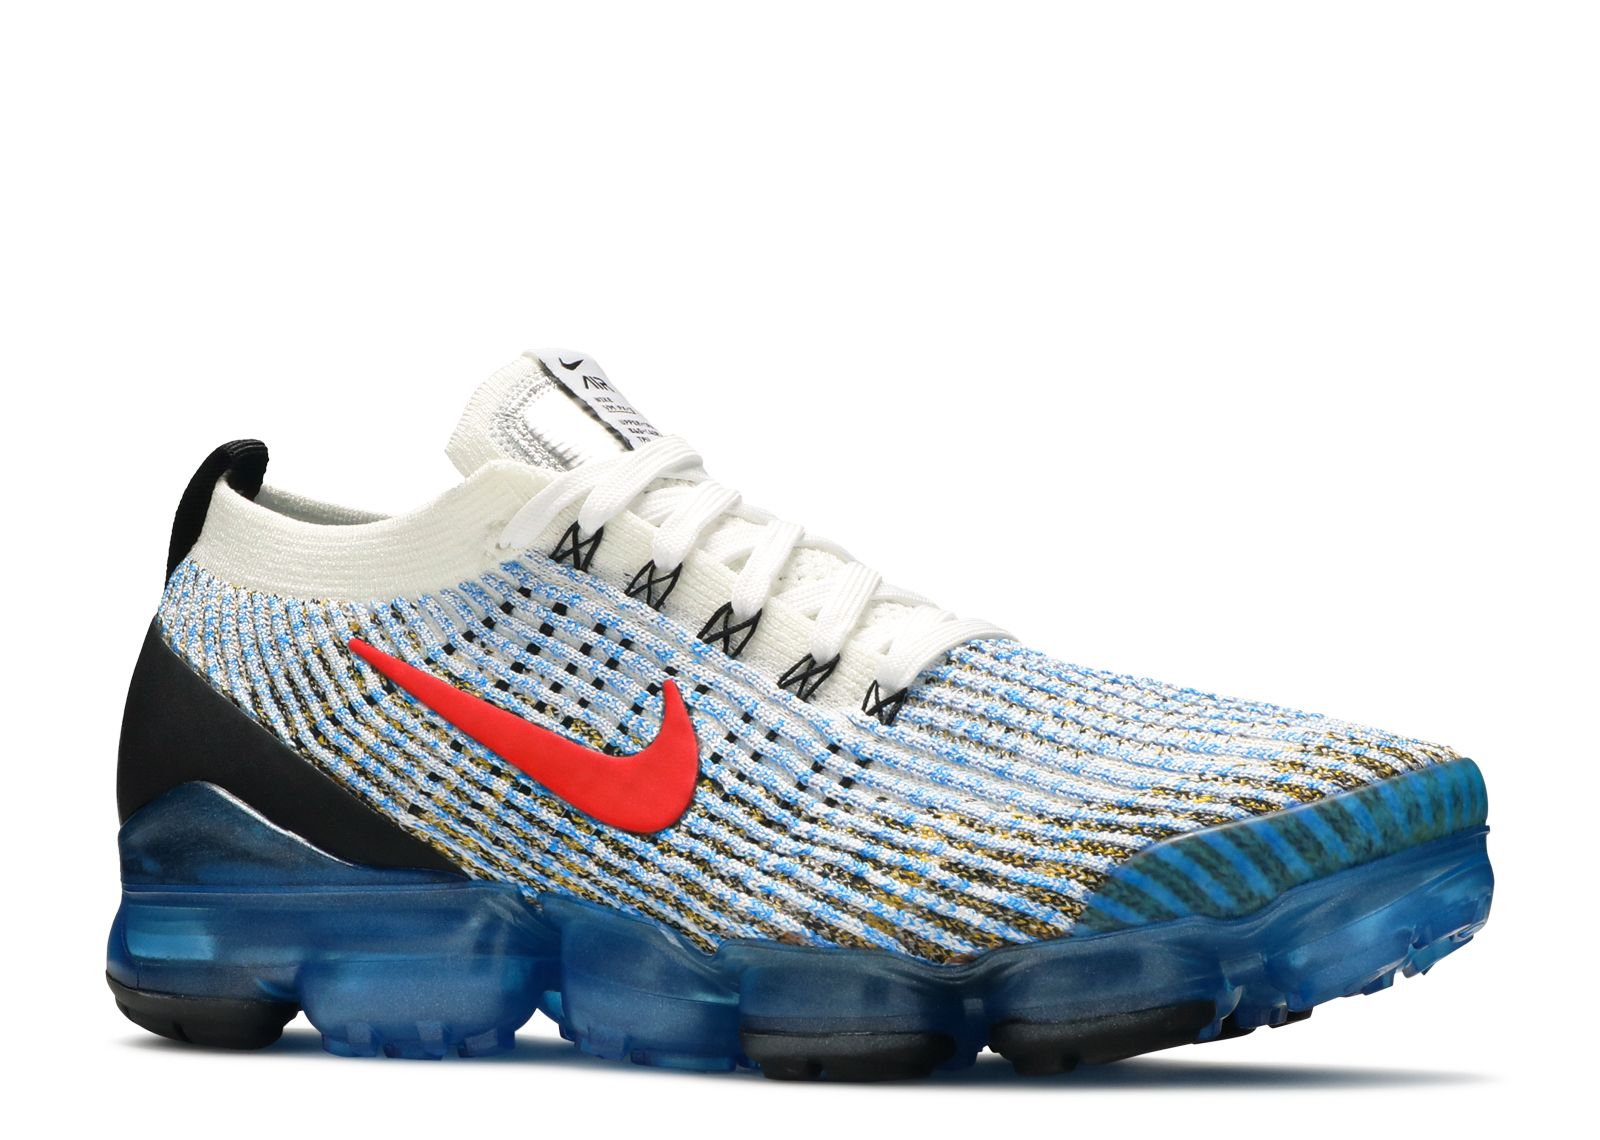 nike air vapormax flyknit blue and white